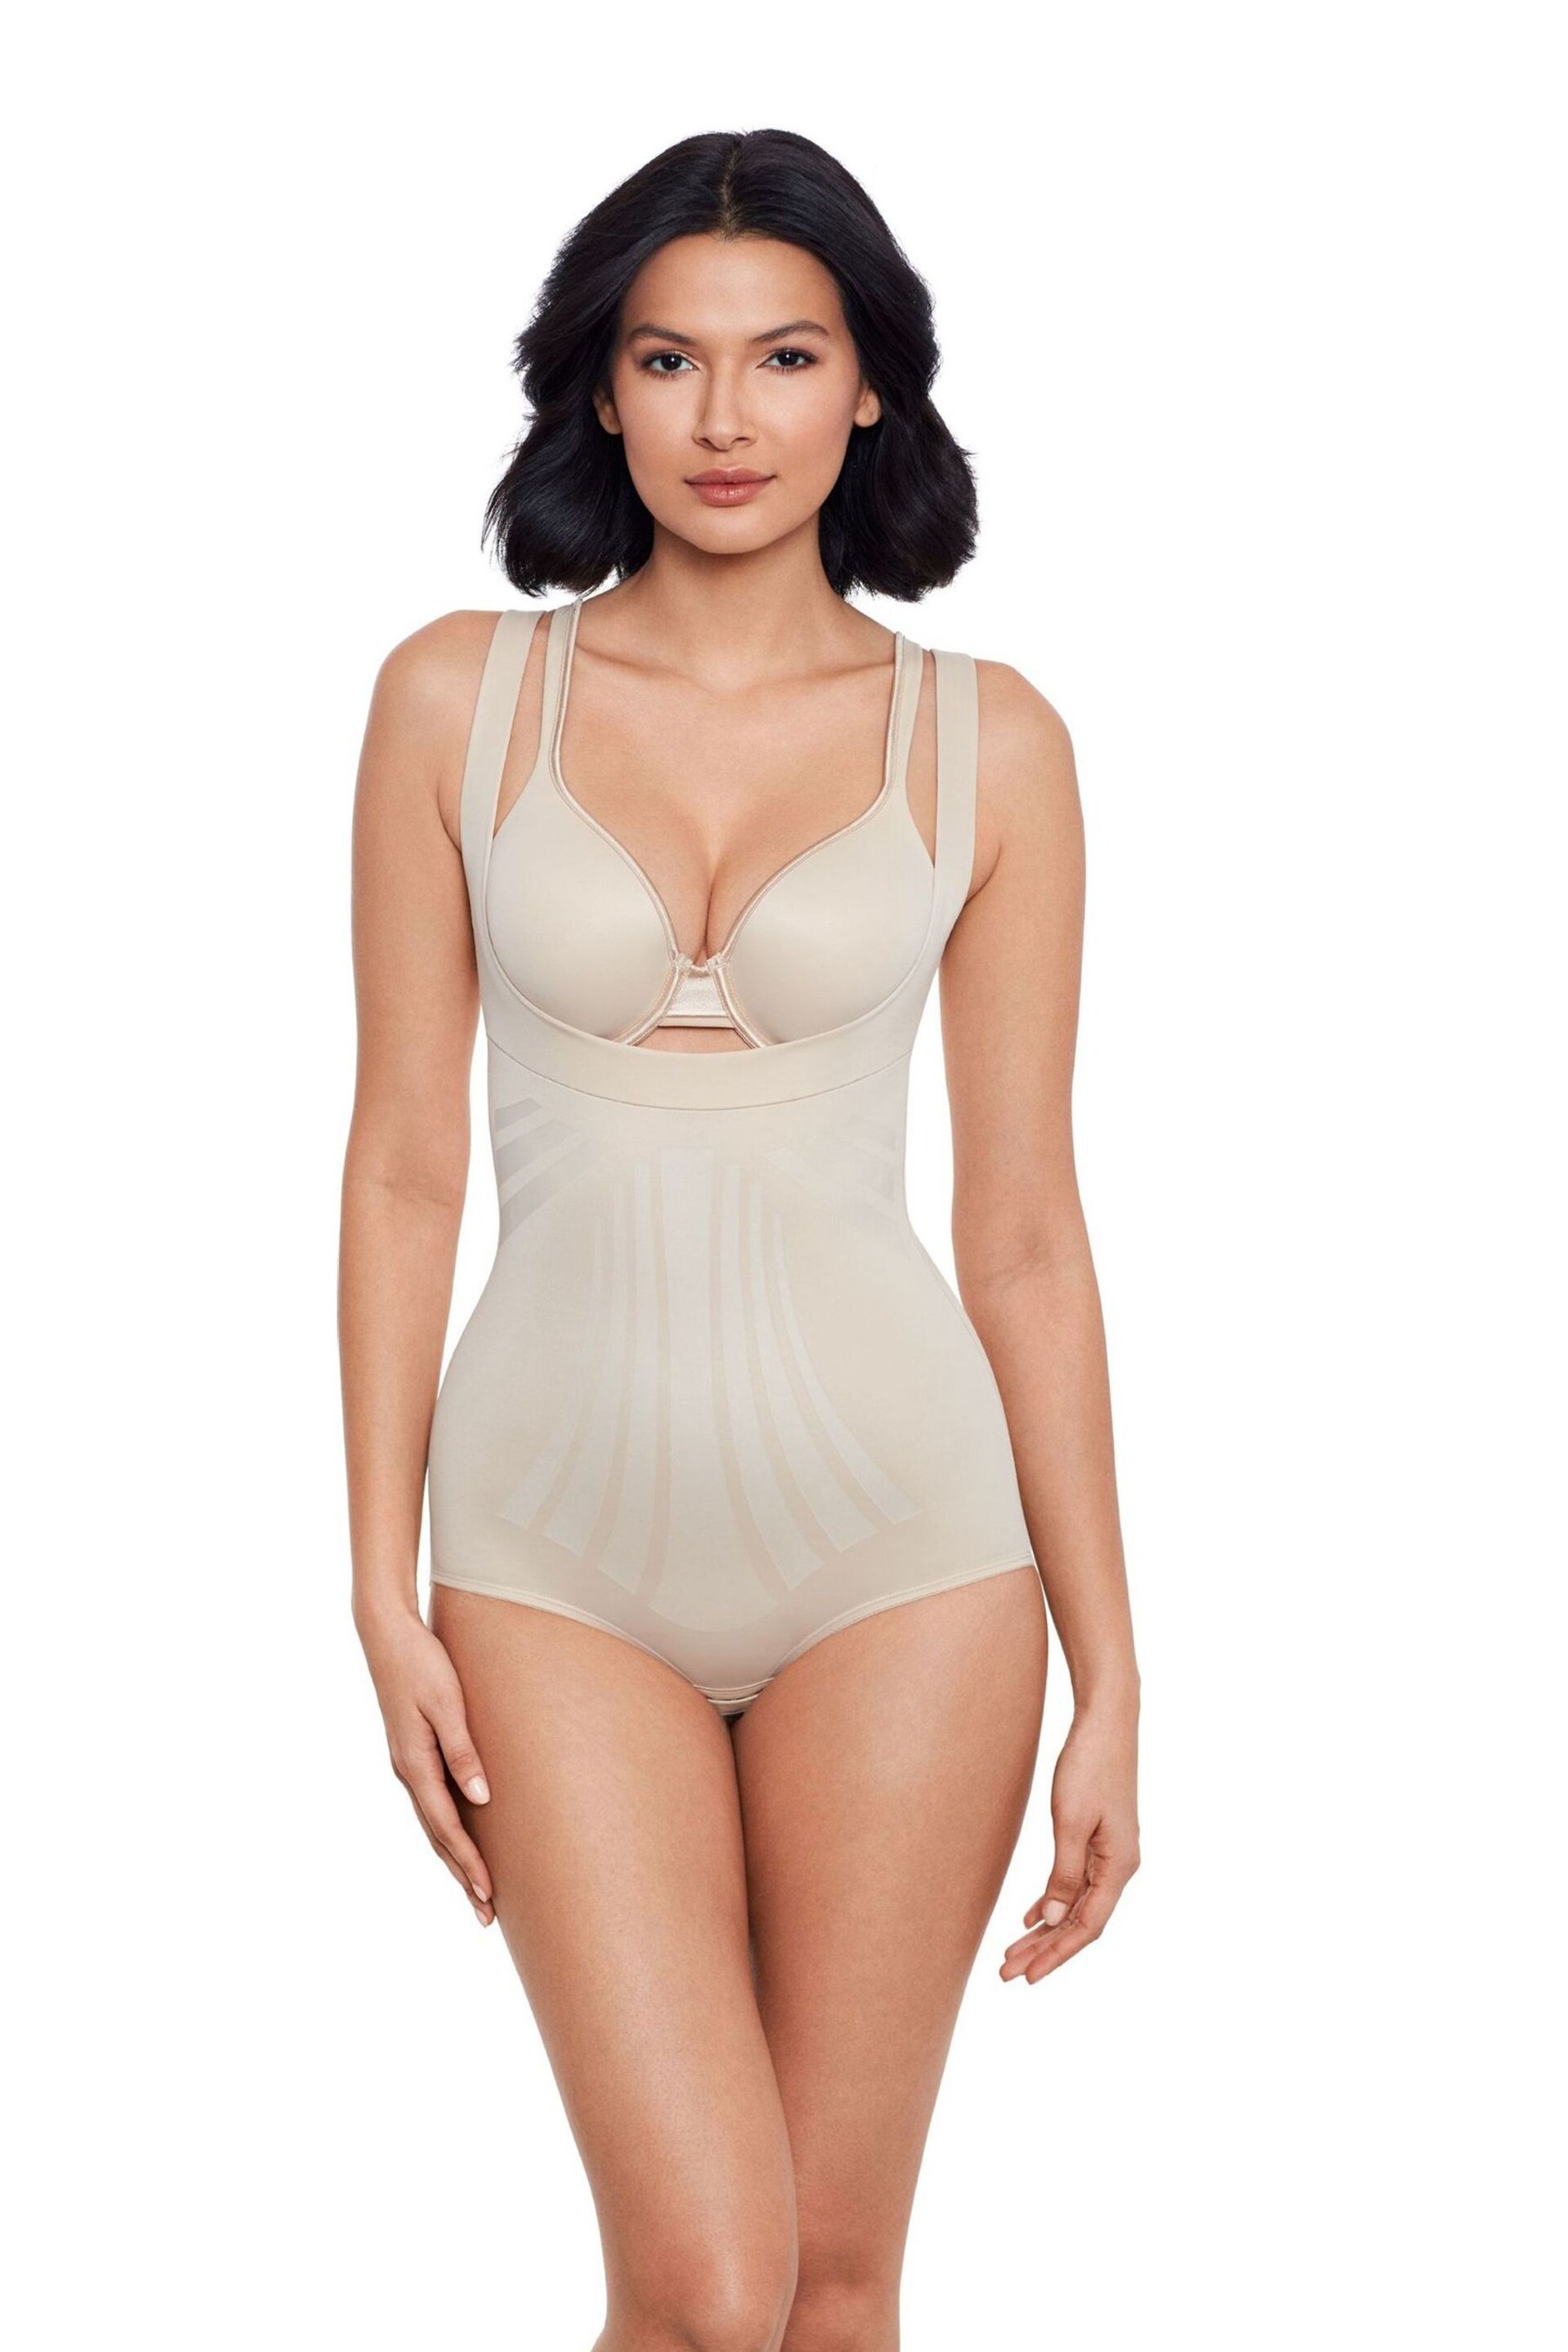 Miraclesuit Modern Miracle™ Open Bust, Wear Your Own Bra Shaping Nude Bodysuit - Image 1 of 1